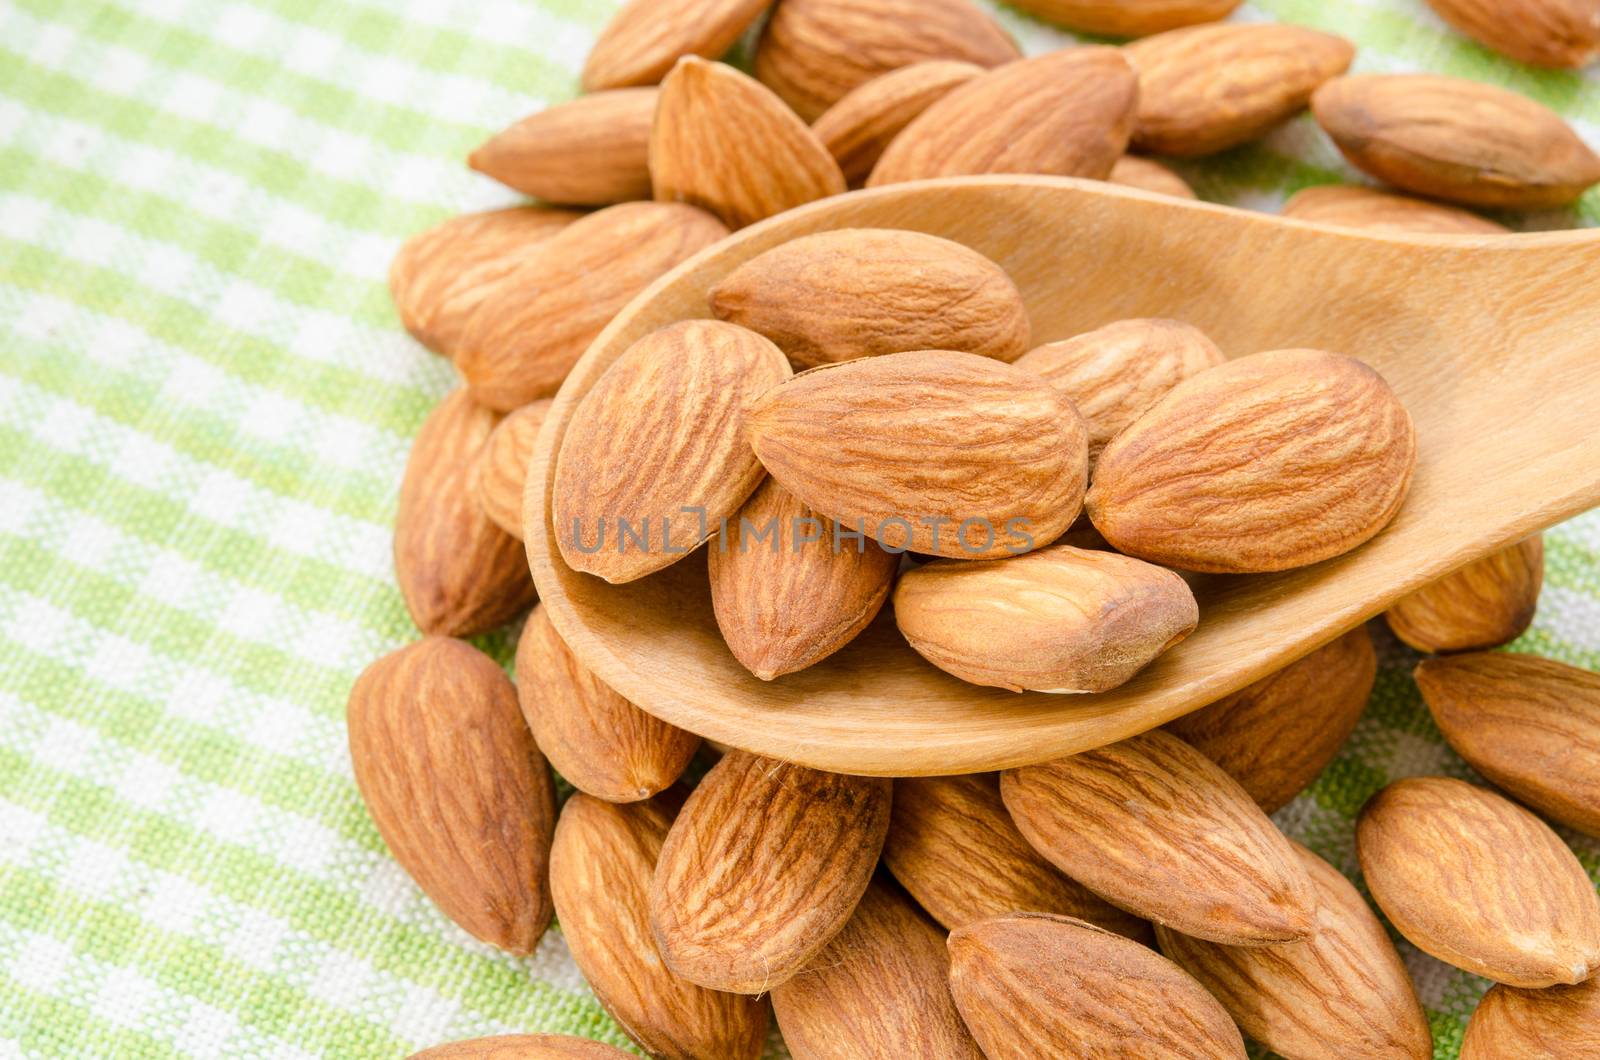 Almonds in wooden spoon on tablecloth.